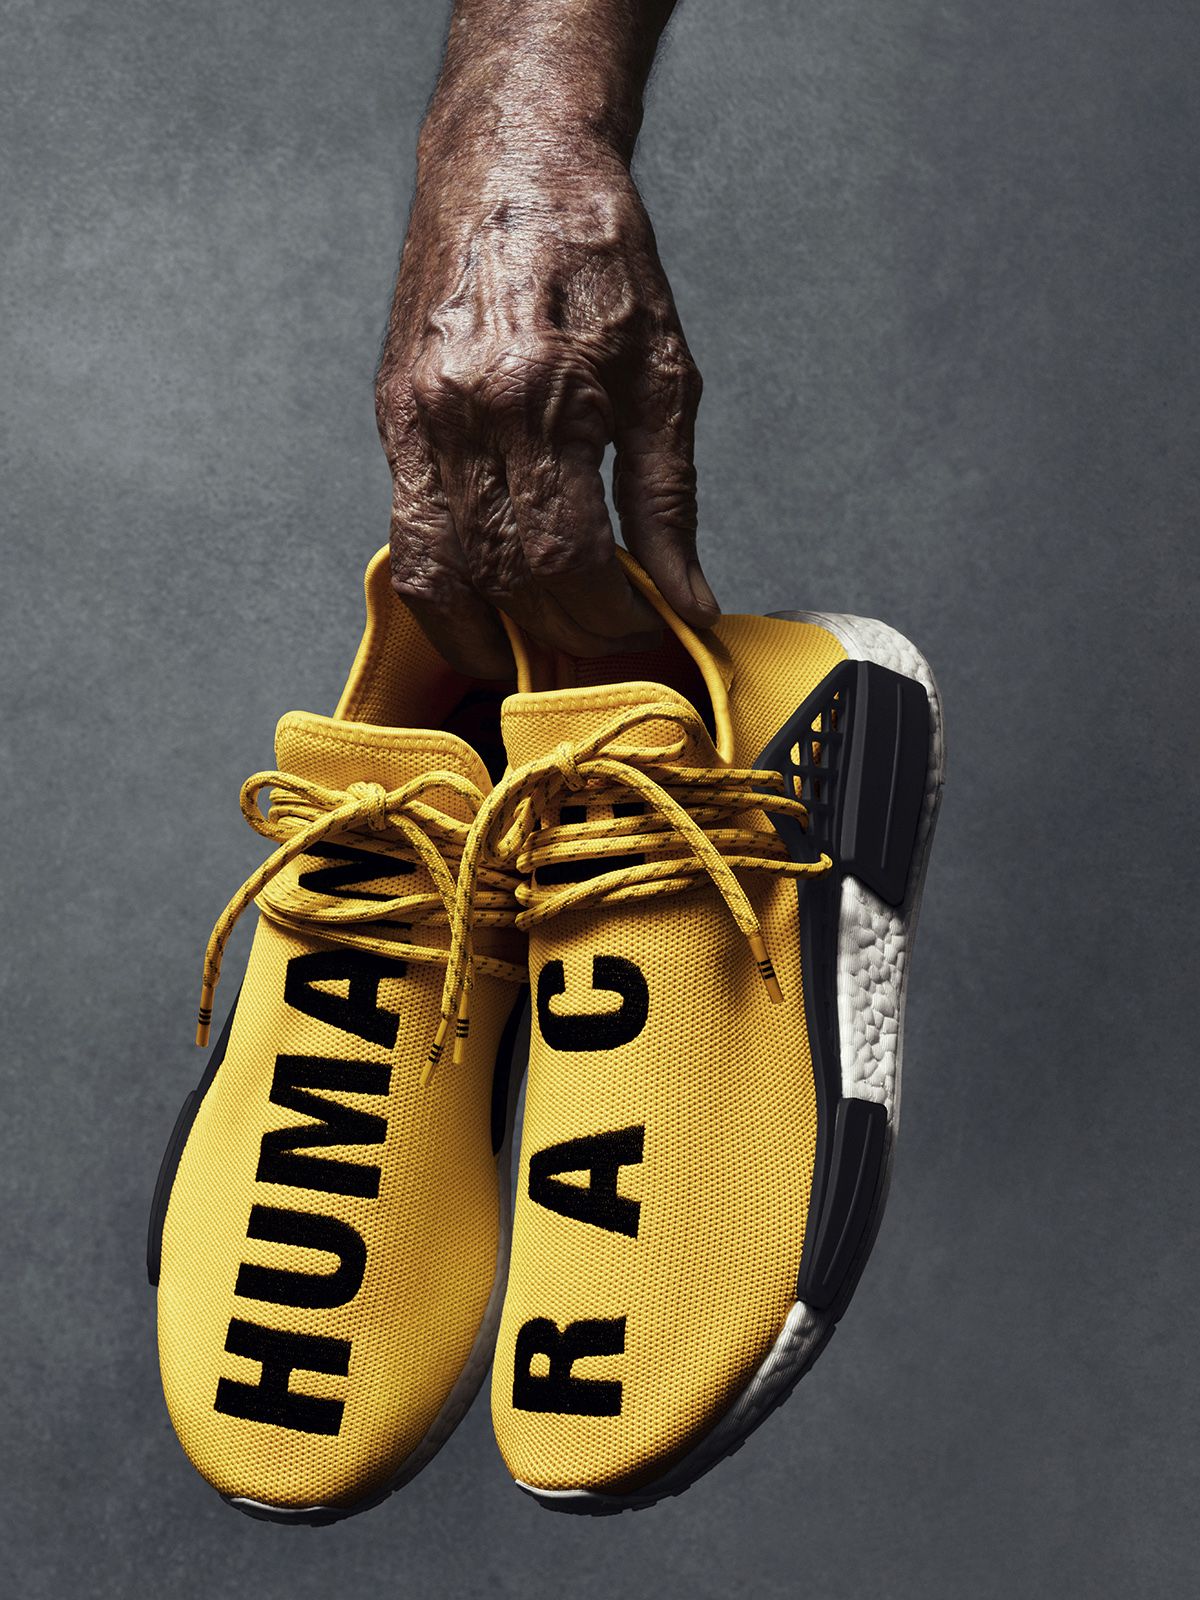 First Look At The Bape X Adidas Nmd R1 - Pharrell Williams Nmd , HD Wallpaper & Backgrounds